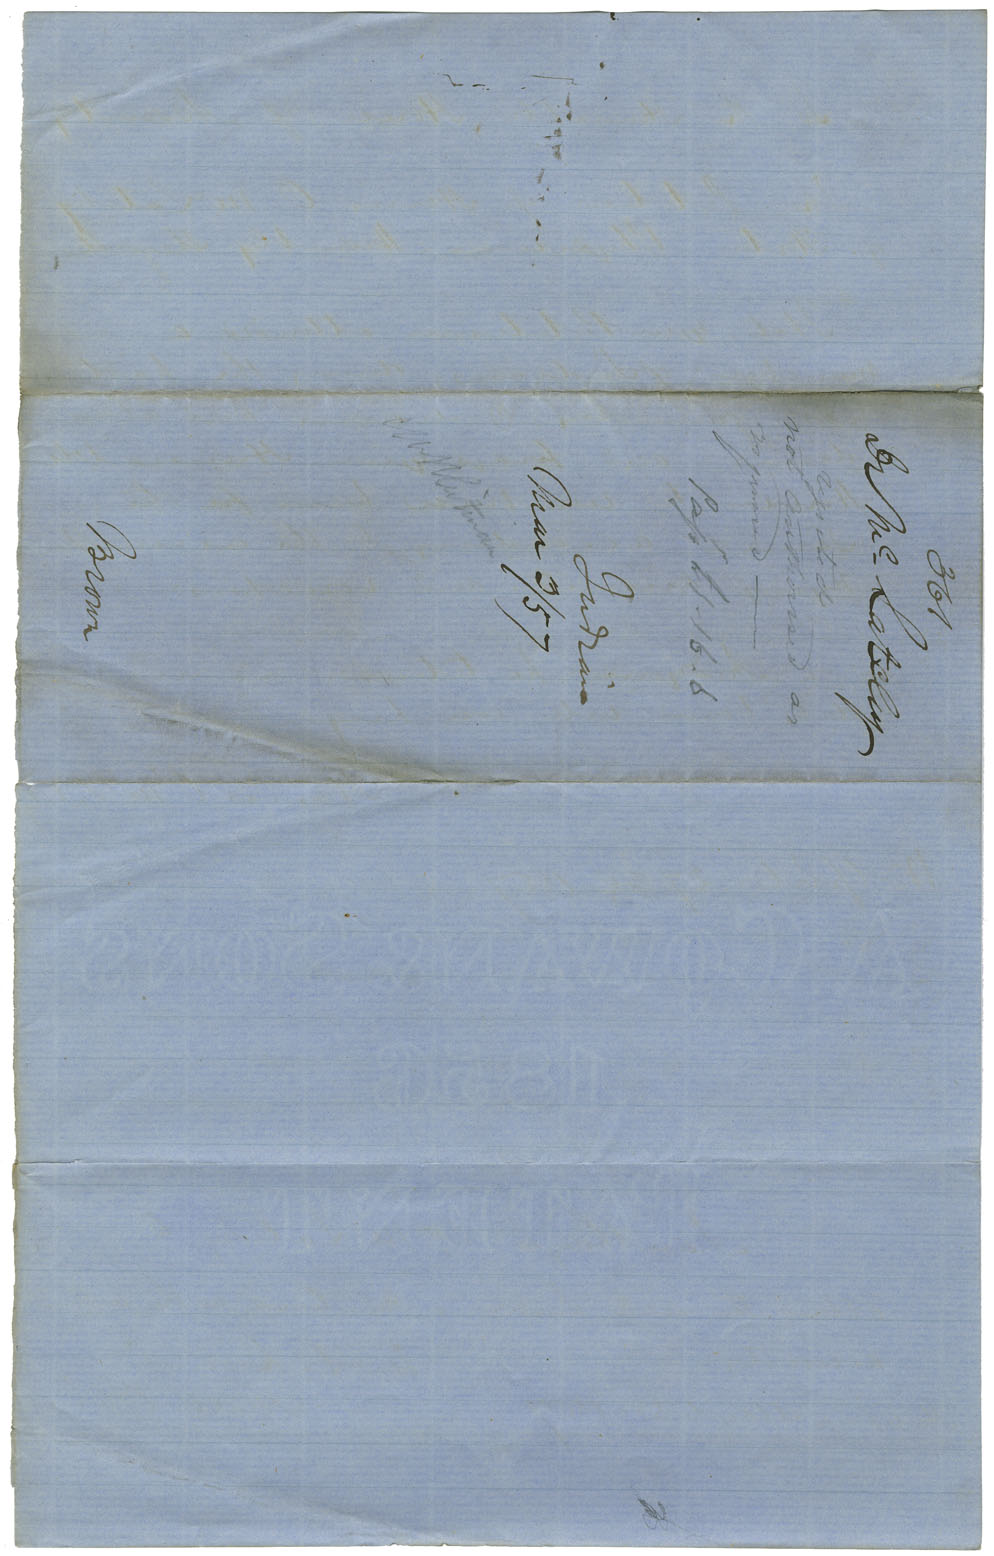 Petition of Harris O. McLatchy of Horton, physician, for money for services to Mi'kmaq in 1856.